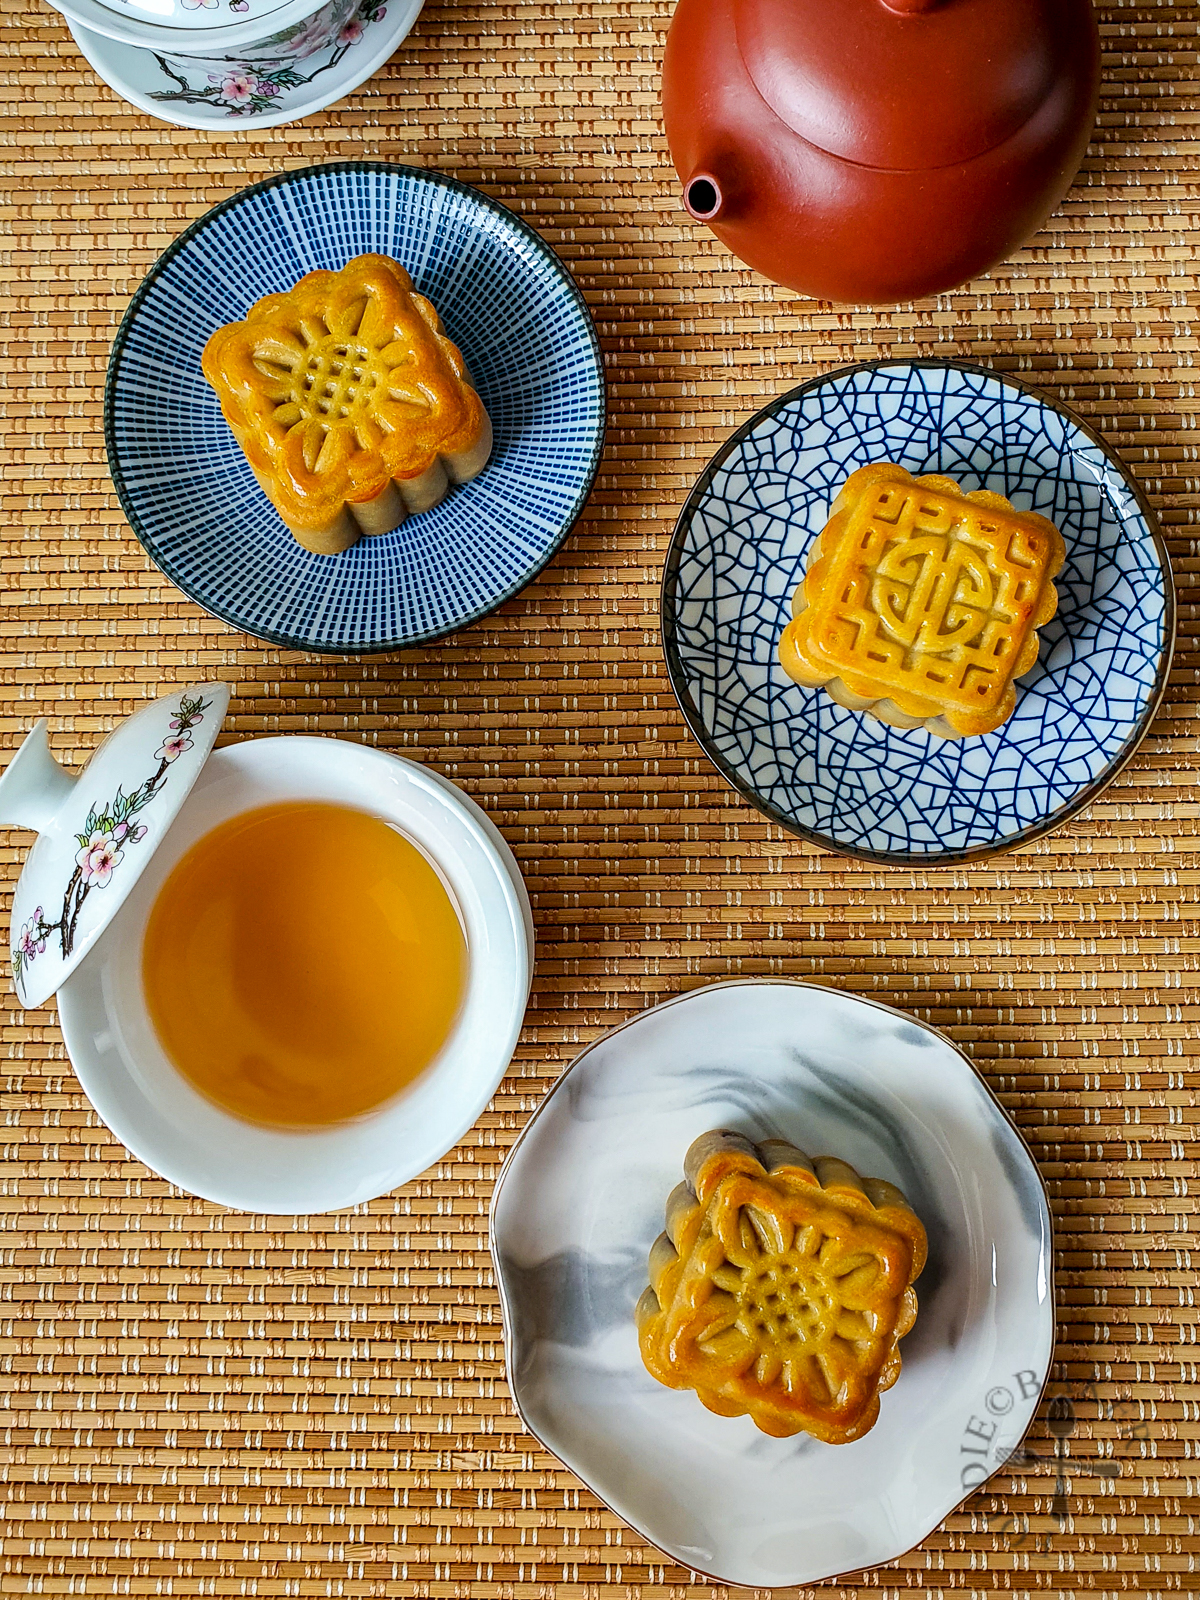 Traditional Baked Mooncake